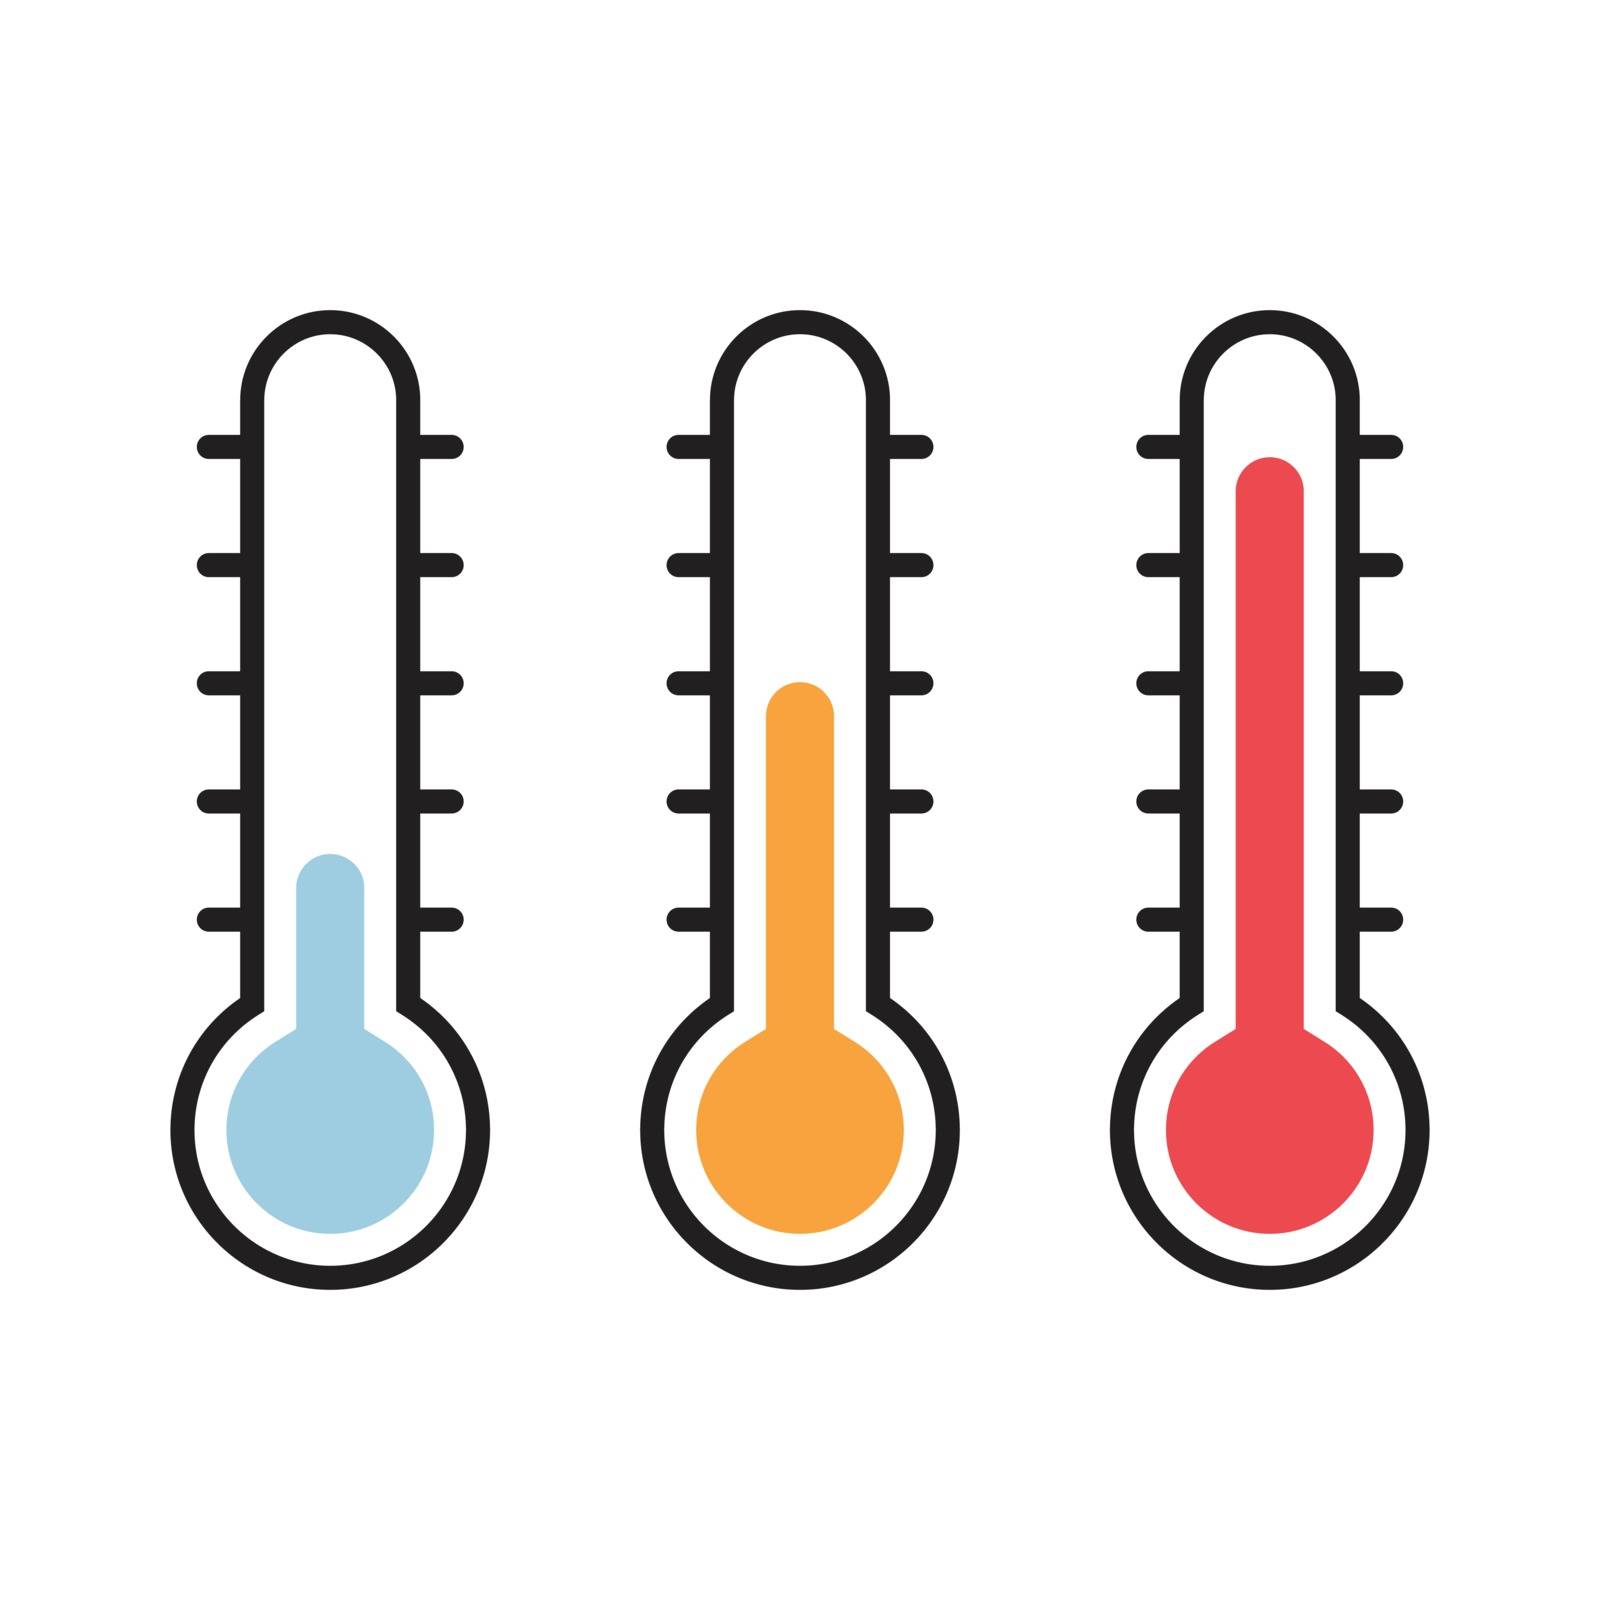 Thermometer Vector Illustration by solargaria